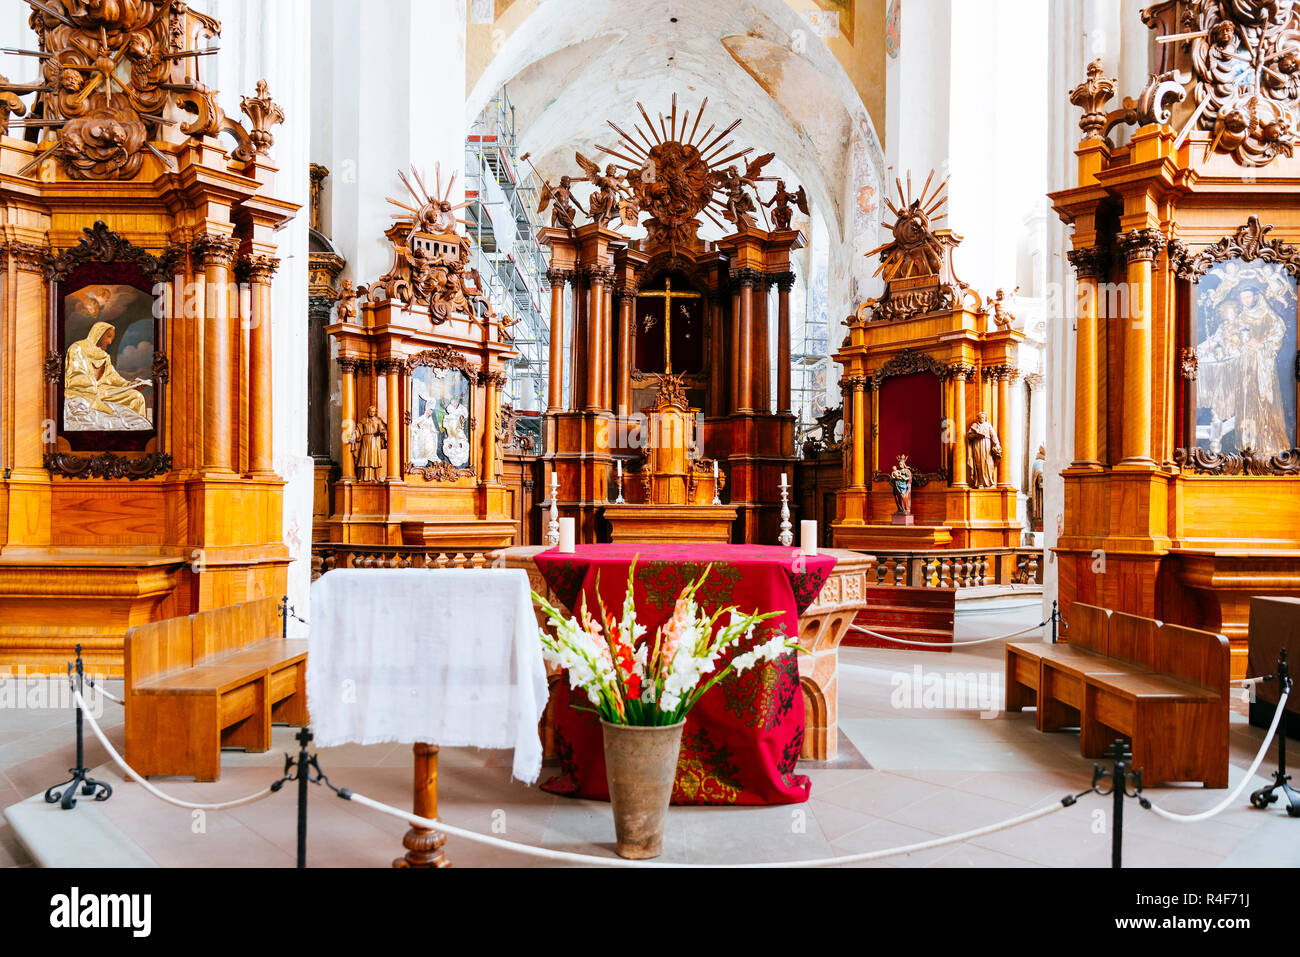 Main altar, Church of St. Francis and St. Bernard is a Roman Catholic church in Vilnius Old Town. Vilnius, Vilnius County, Lithuania, Baltic states, E Stock Photo